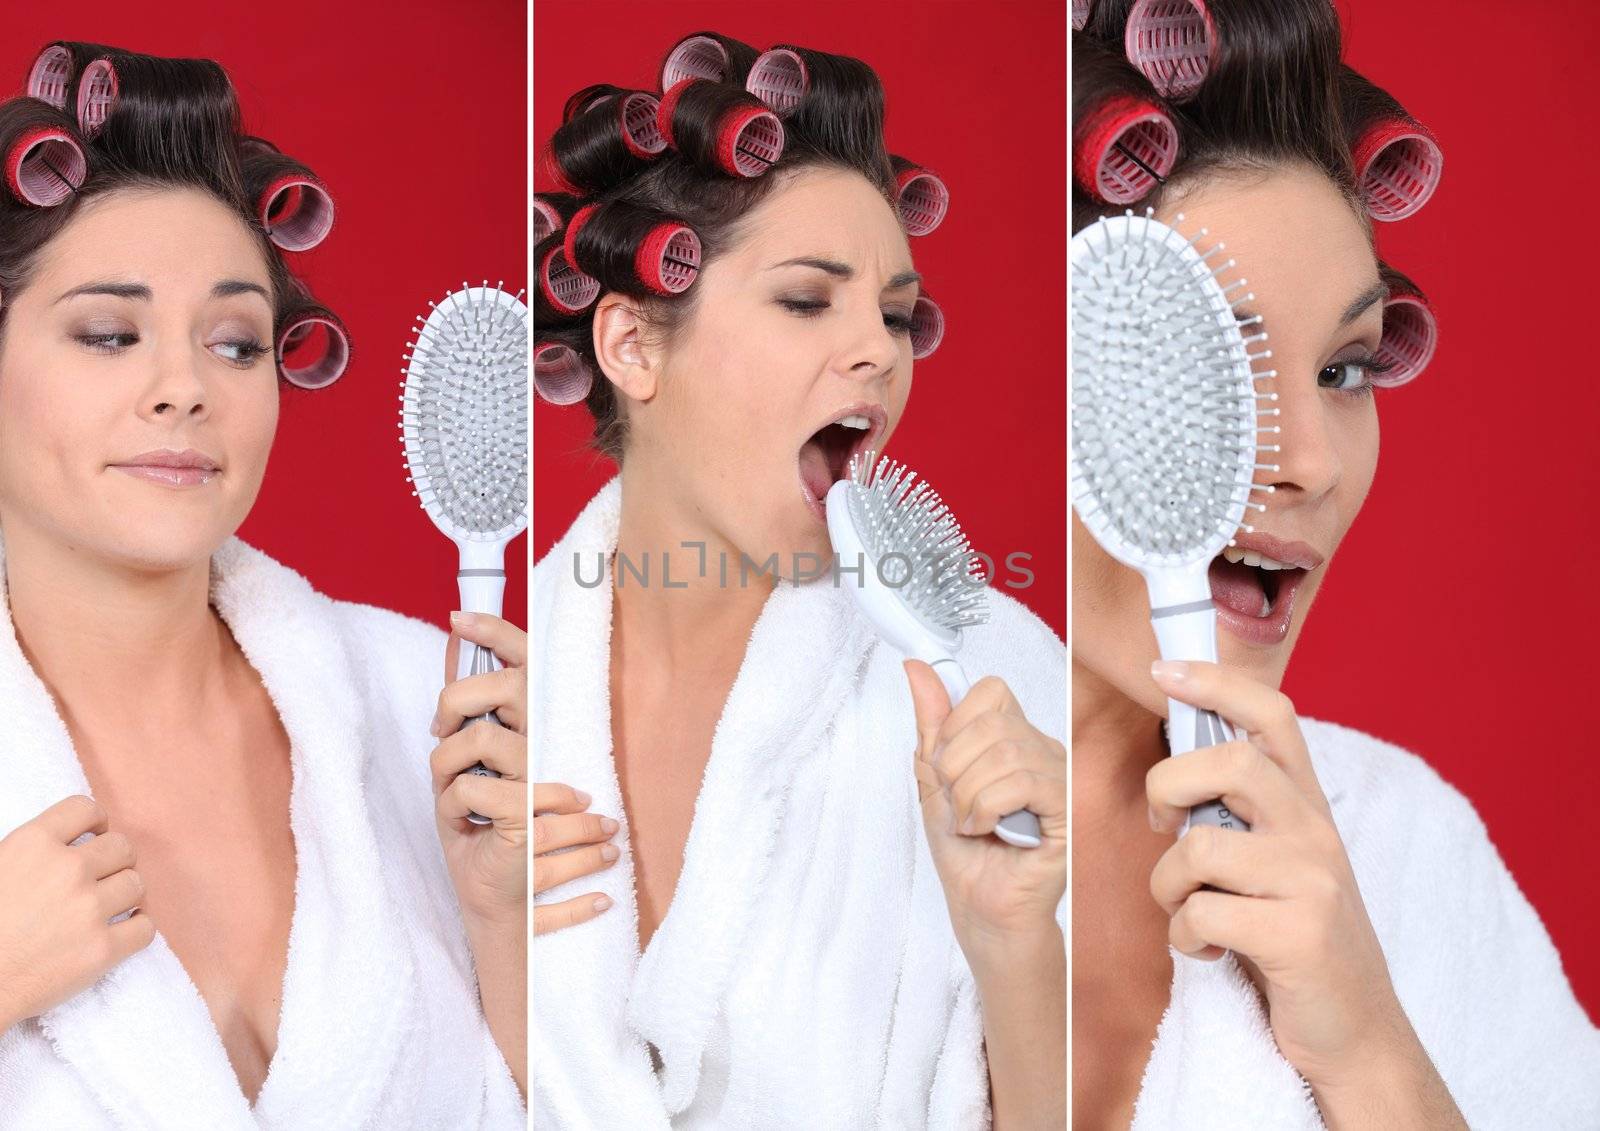 brunette wearing bathrobe with hair curlers holding hairbrush holding against red background by phovoir